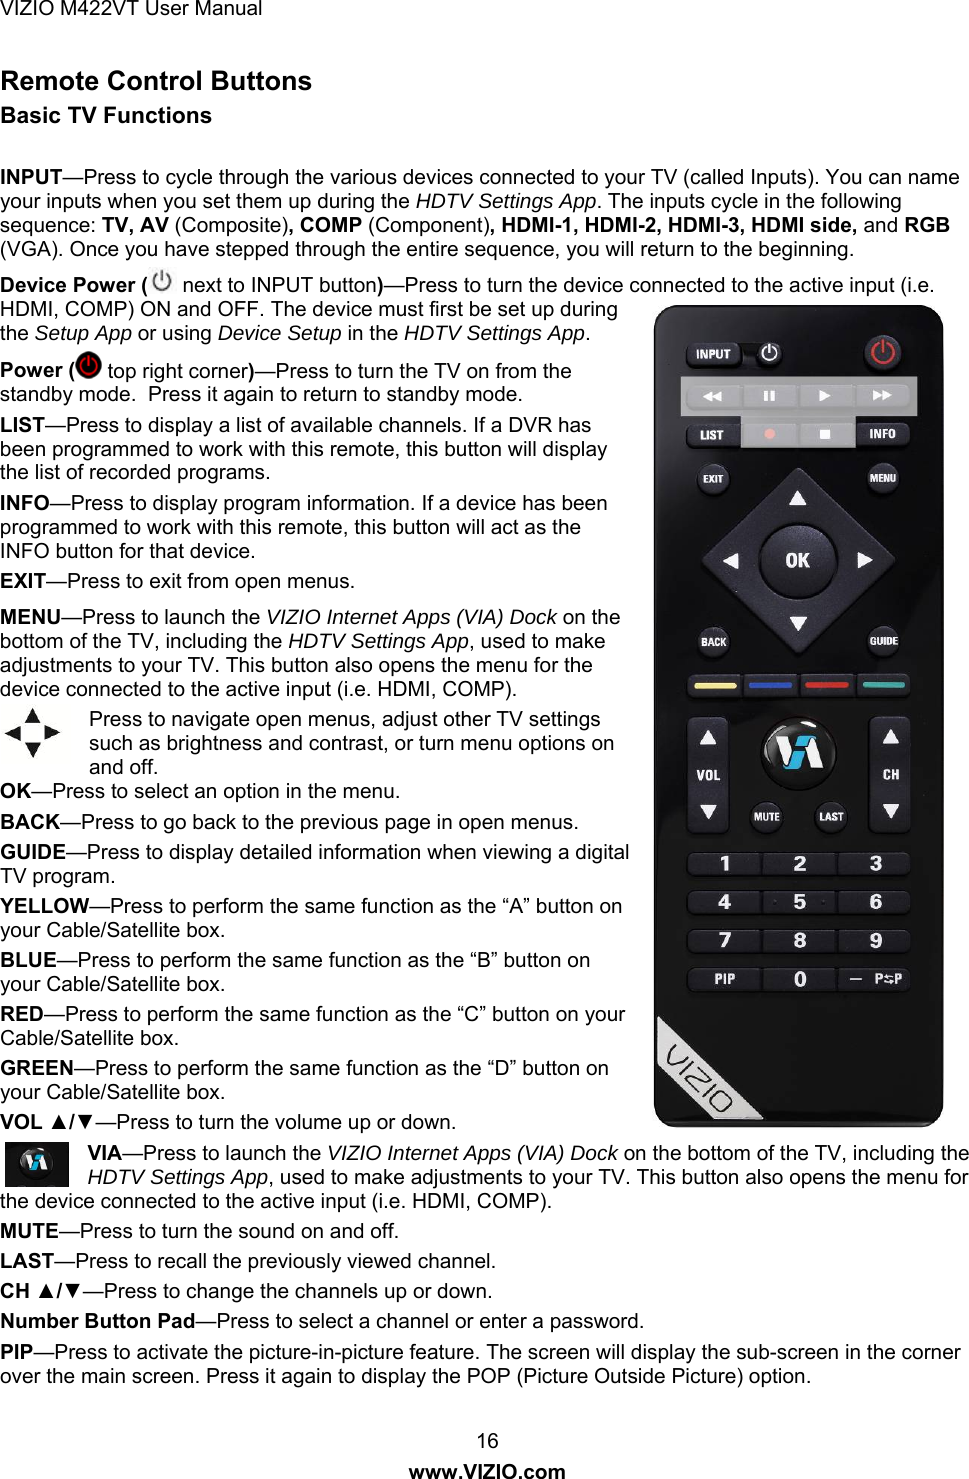 VIZIO M422VT User Manual 16 www.VIZIO.com Remote Control Buttons Basic TV Functions  INPUT—Press to cycle through the various devices connected to your TV (called Inputs). You can name your inputs when you set them up during the HDTV Settings App. The inputs cycle in the following sequence: TV, AV (Composite), COMP (Component), HDMI-1, HDMI-2, HDMI-3, HDMI side, and RGB (VGA). Once you have stepped through the entire sequence, you will return to the beginning. Device Power (  next to INPUT button)—Press to turn the device connected to the active input (i.e. HDMI, COMP) ON and OFF. The device must first be set up during the Setup App or using Device Setup in the HDTV Settings App.  Power (  top right corner)—Press to turn the TV on from the standby mode.  Press it again to return to standby mode. LIST—Press to display a list of available channels. If a DVR has been programmed to work with this remote, this button will display the list of recorded programs. INFO—Press to display program information. If a device has been programmed to work with this remote, this button will act as the INFO button for that device. EXIT—Press to exit from open menus. MENU—Press to launch the VIZIO Internet Apps (VIA) Dock on the bottom of the TV, including the HDTV Settings App, used to make adjustments to your TV. This button also opens the menu for the device connected to the active input (i.e. HDMI, COMP). Press to navigate open menus, adjust other TV settings such as brightness and contrast, or turn menu options on and off. OK—Press to select an option in the menu. BACK—Press to go back to the previous page in open menus. GUIDE—Press to display detailed information when viewing a digital TV program. YELLOW—Press to perform the same function as the “A” button on your Cable/Satellite box. BLUE—Press to perform the same function as the “B” button on your Cable/Satellite box. RED—Press to perform the same function as the “C” button on your Cable/Satellite box. GREEN—Press to perform the same function as the “D” button on your Cable/Satellite box. VOL ▲/▼—Press to turn the volume up or down. VIA—Press to launch the VIZIO Internet Apps (VIA) Dock on the bottom of the TV, including the HDTV Settings App, used to make adjustments to your TV. This button also opens the menu for the device connected to the active input (i.e. HDMI, COMP). MUTE—Press to turn the sound on and off. LAST—Press to recall the previously viewed channel.  CH ▲/▼—Press to change the channels up or down. Number Button Pad—Press to select a channel or enter a password. PIP—Press to activate the picture-in-picture feature. The screen will display the sub-screen in the corner over the main screen. Press it again to display the POP (Picture Outside Picture) option. 